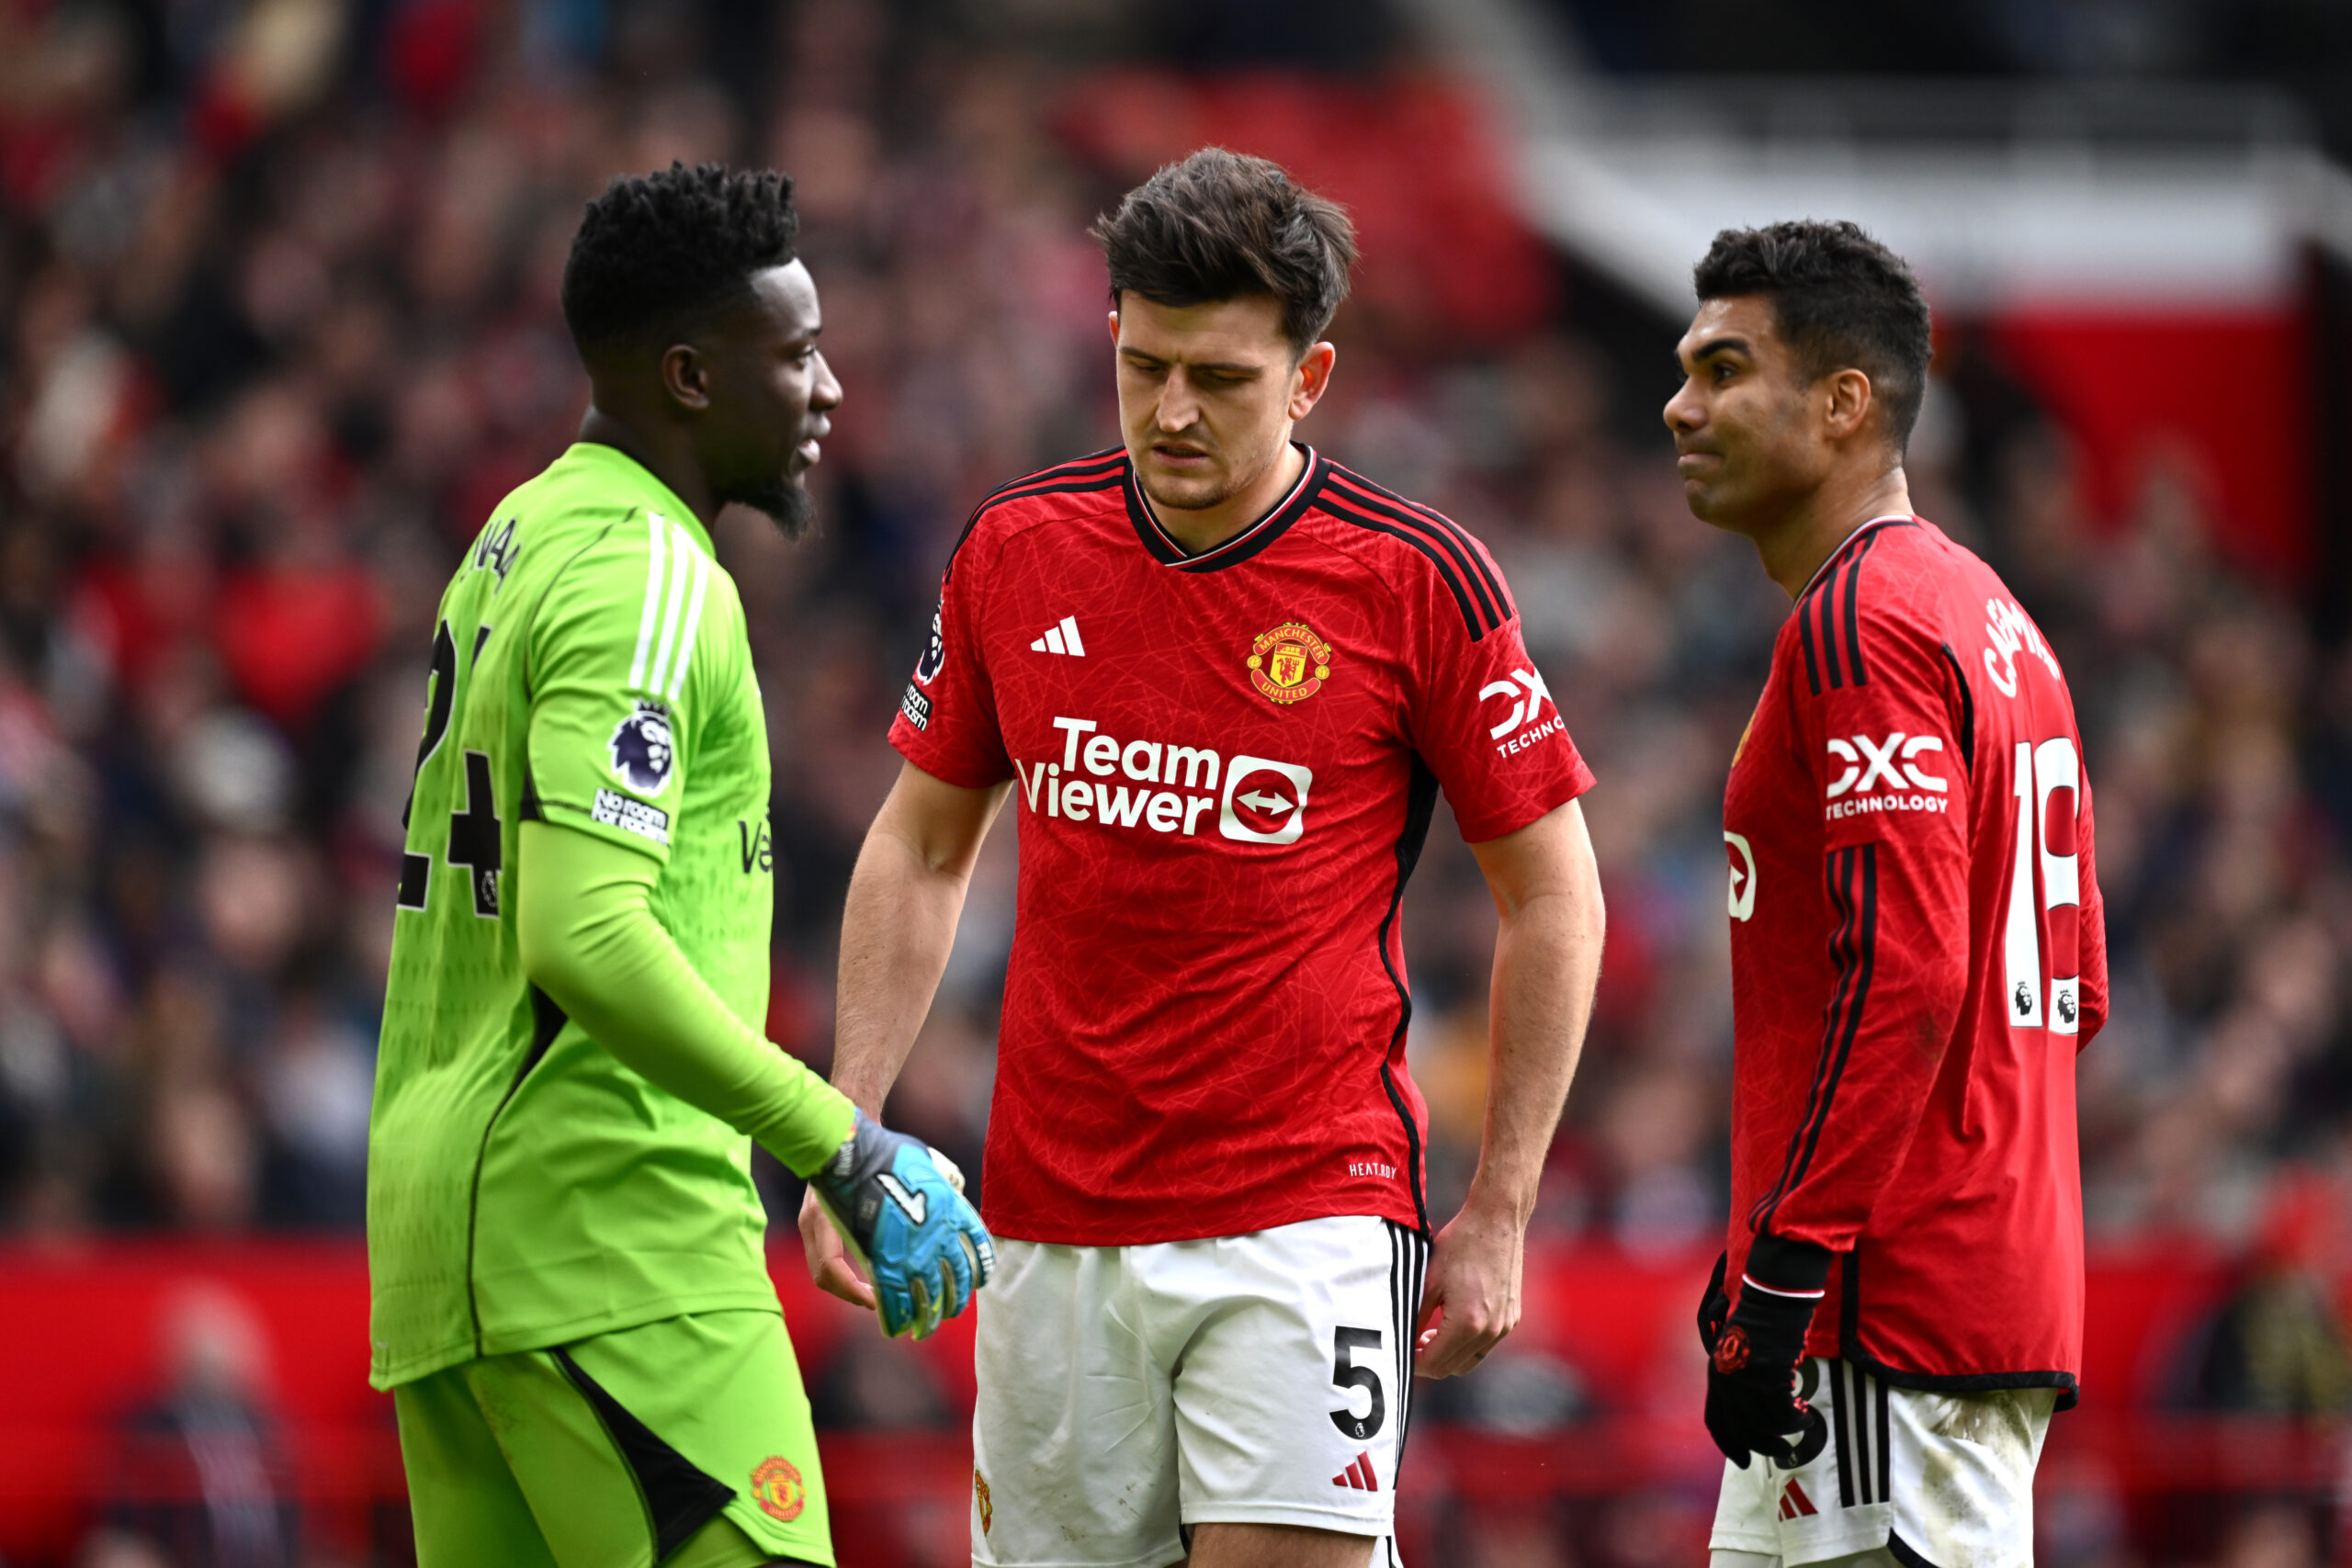 Manchester United star Harry Maguire set to miss out on FA Cup final, shares story on Instagram.